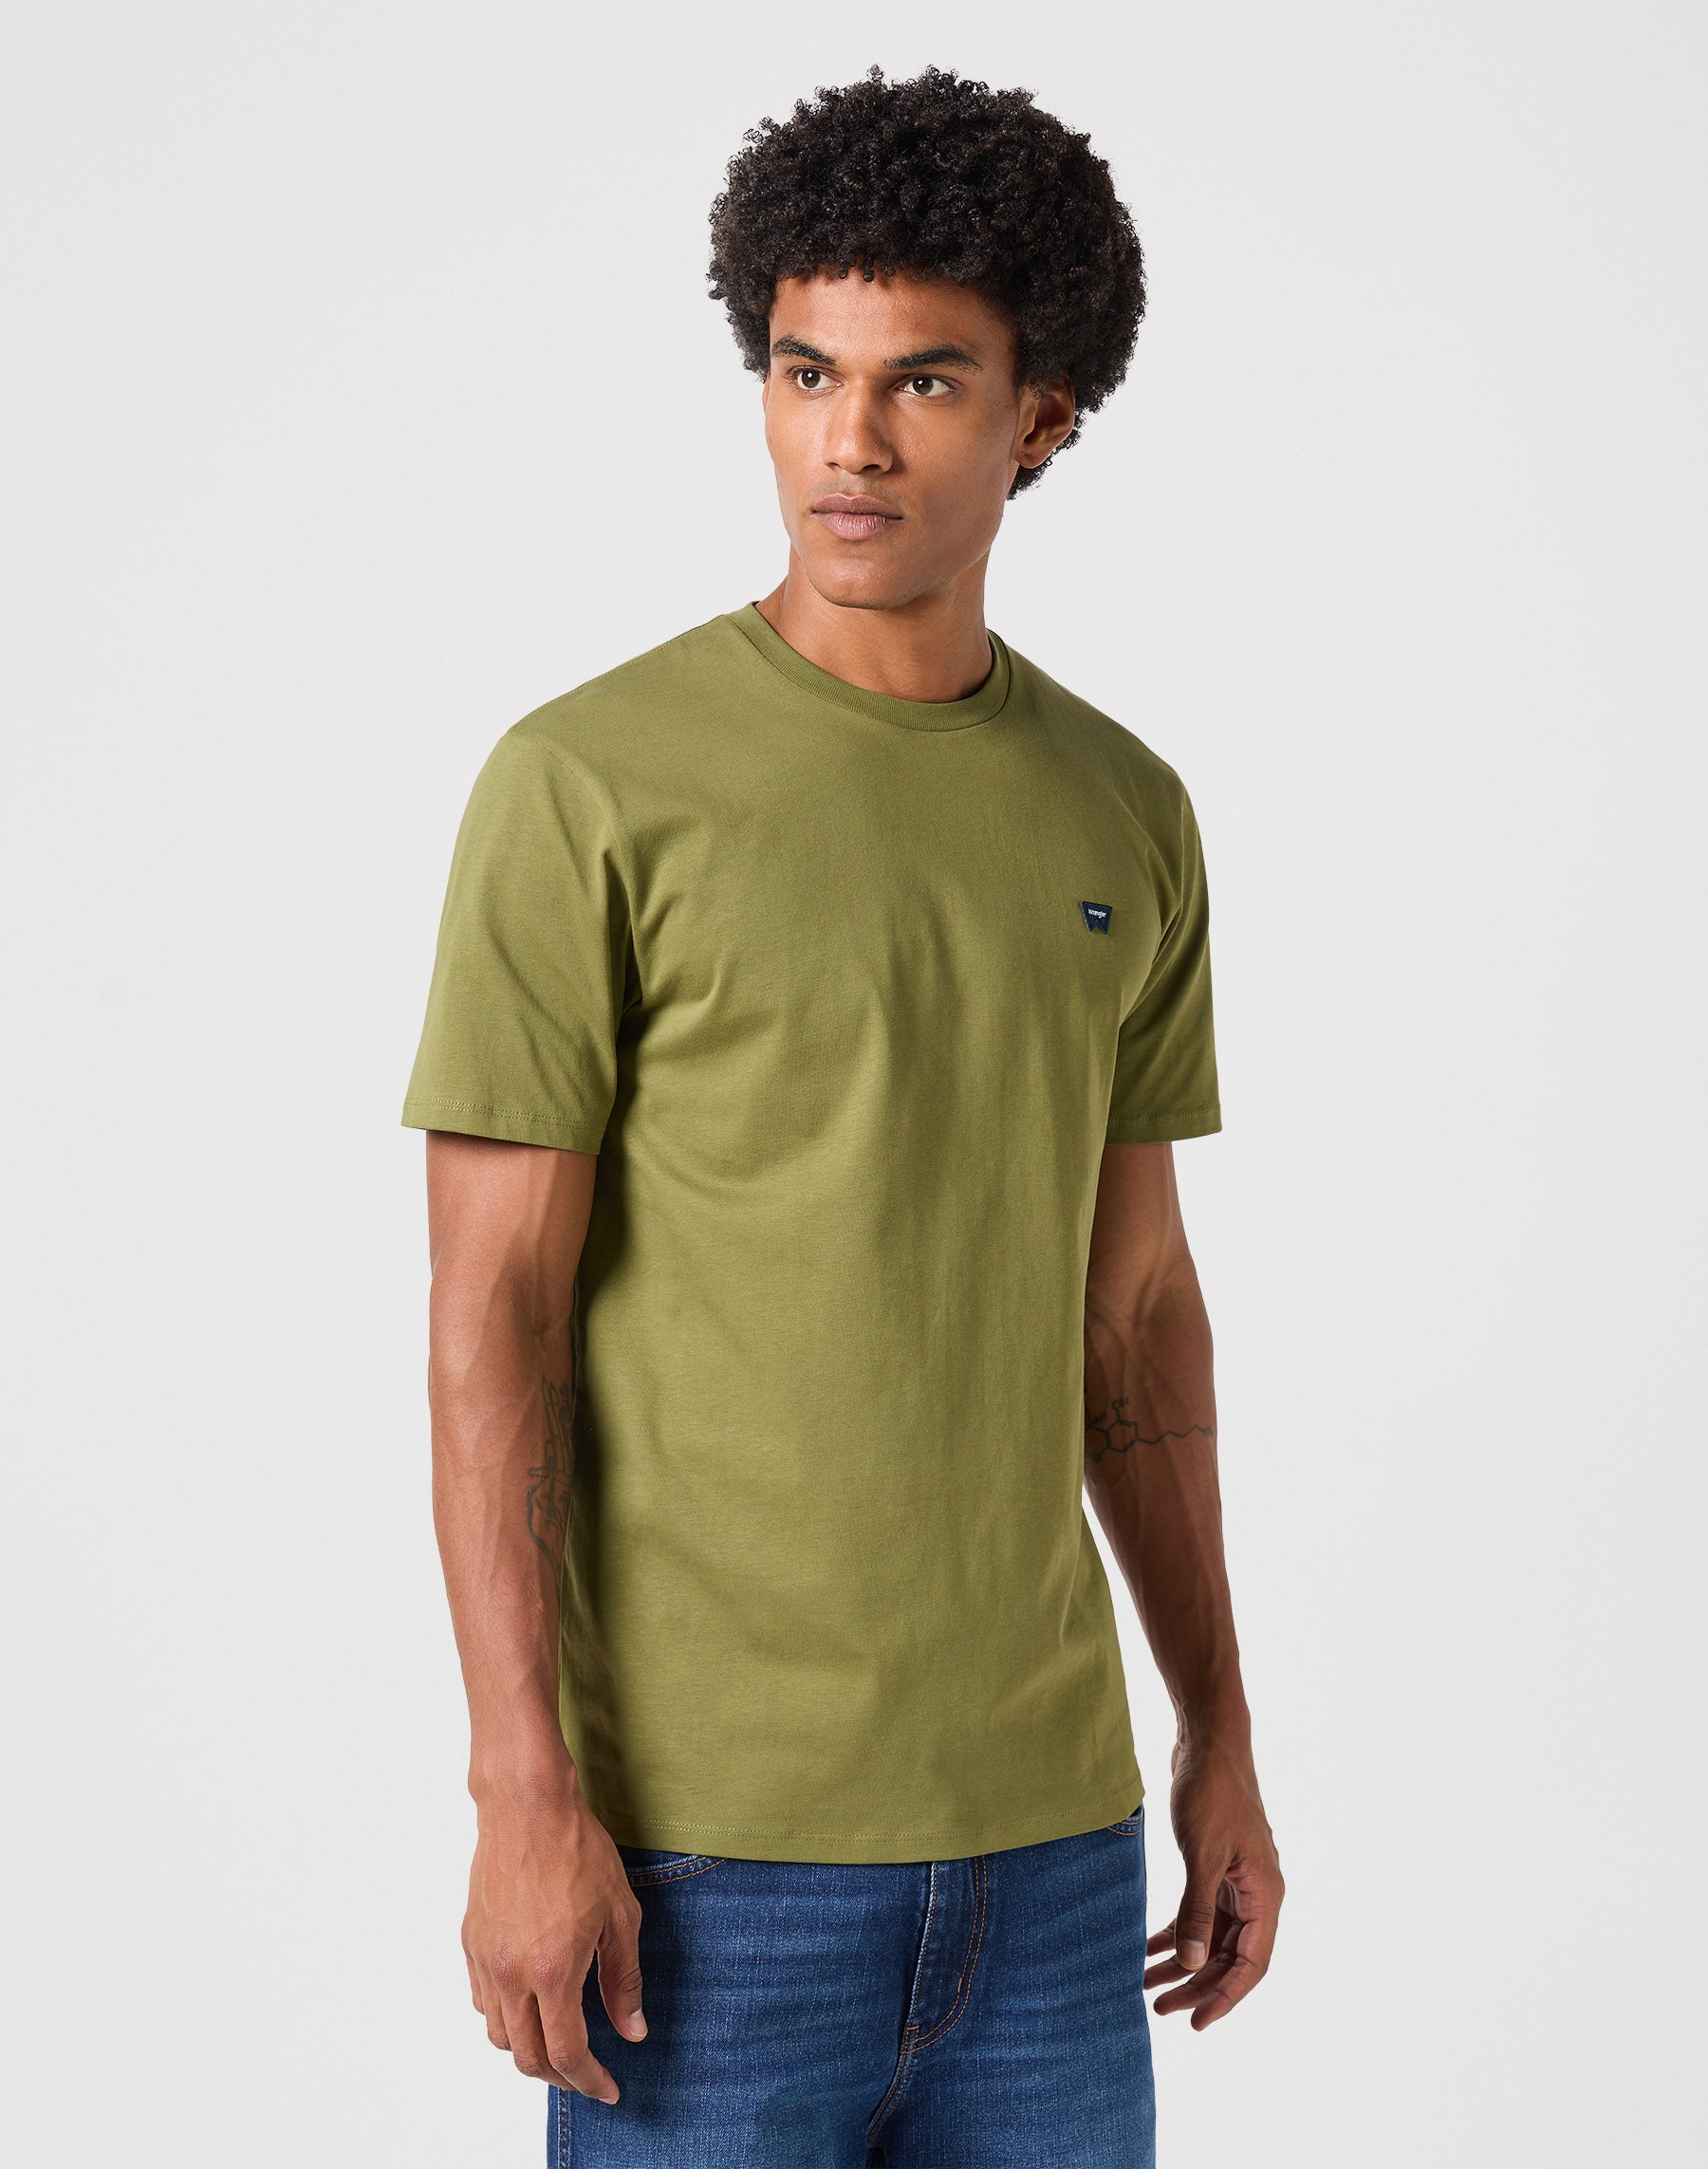 Sign Off Tee in Dusty Olive T-Shirts Wrangler   